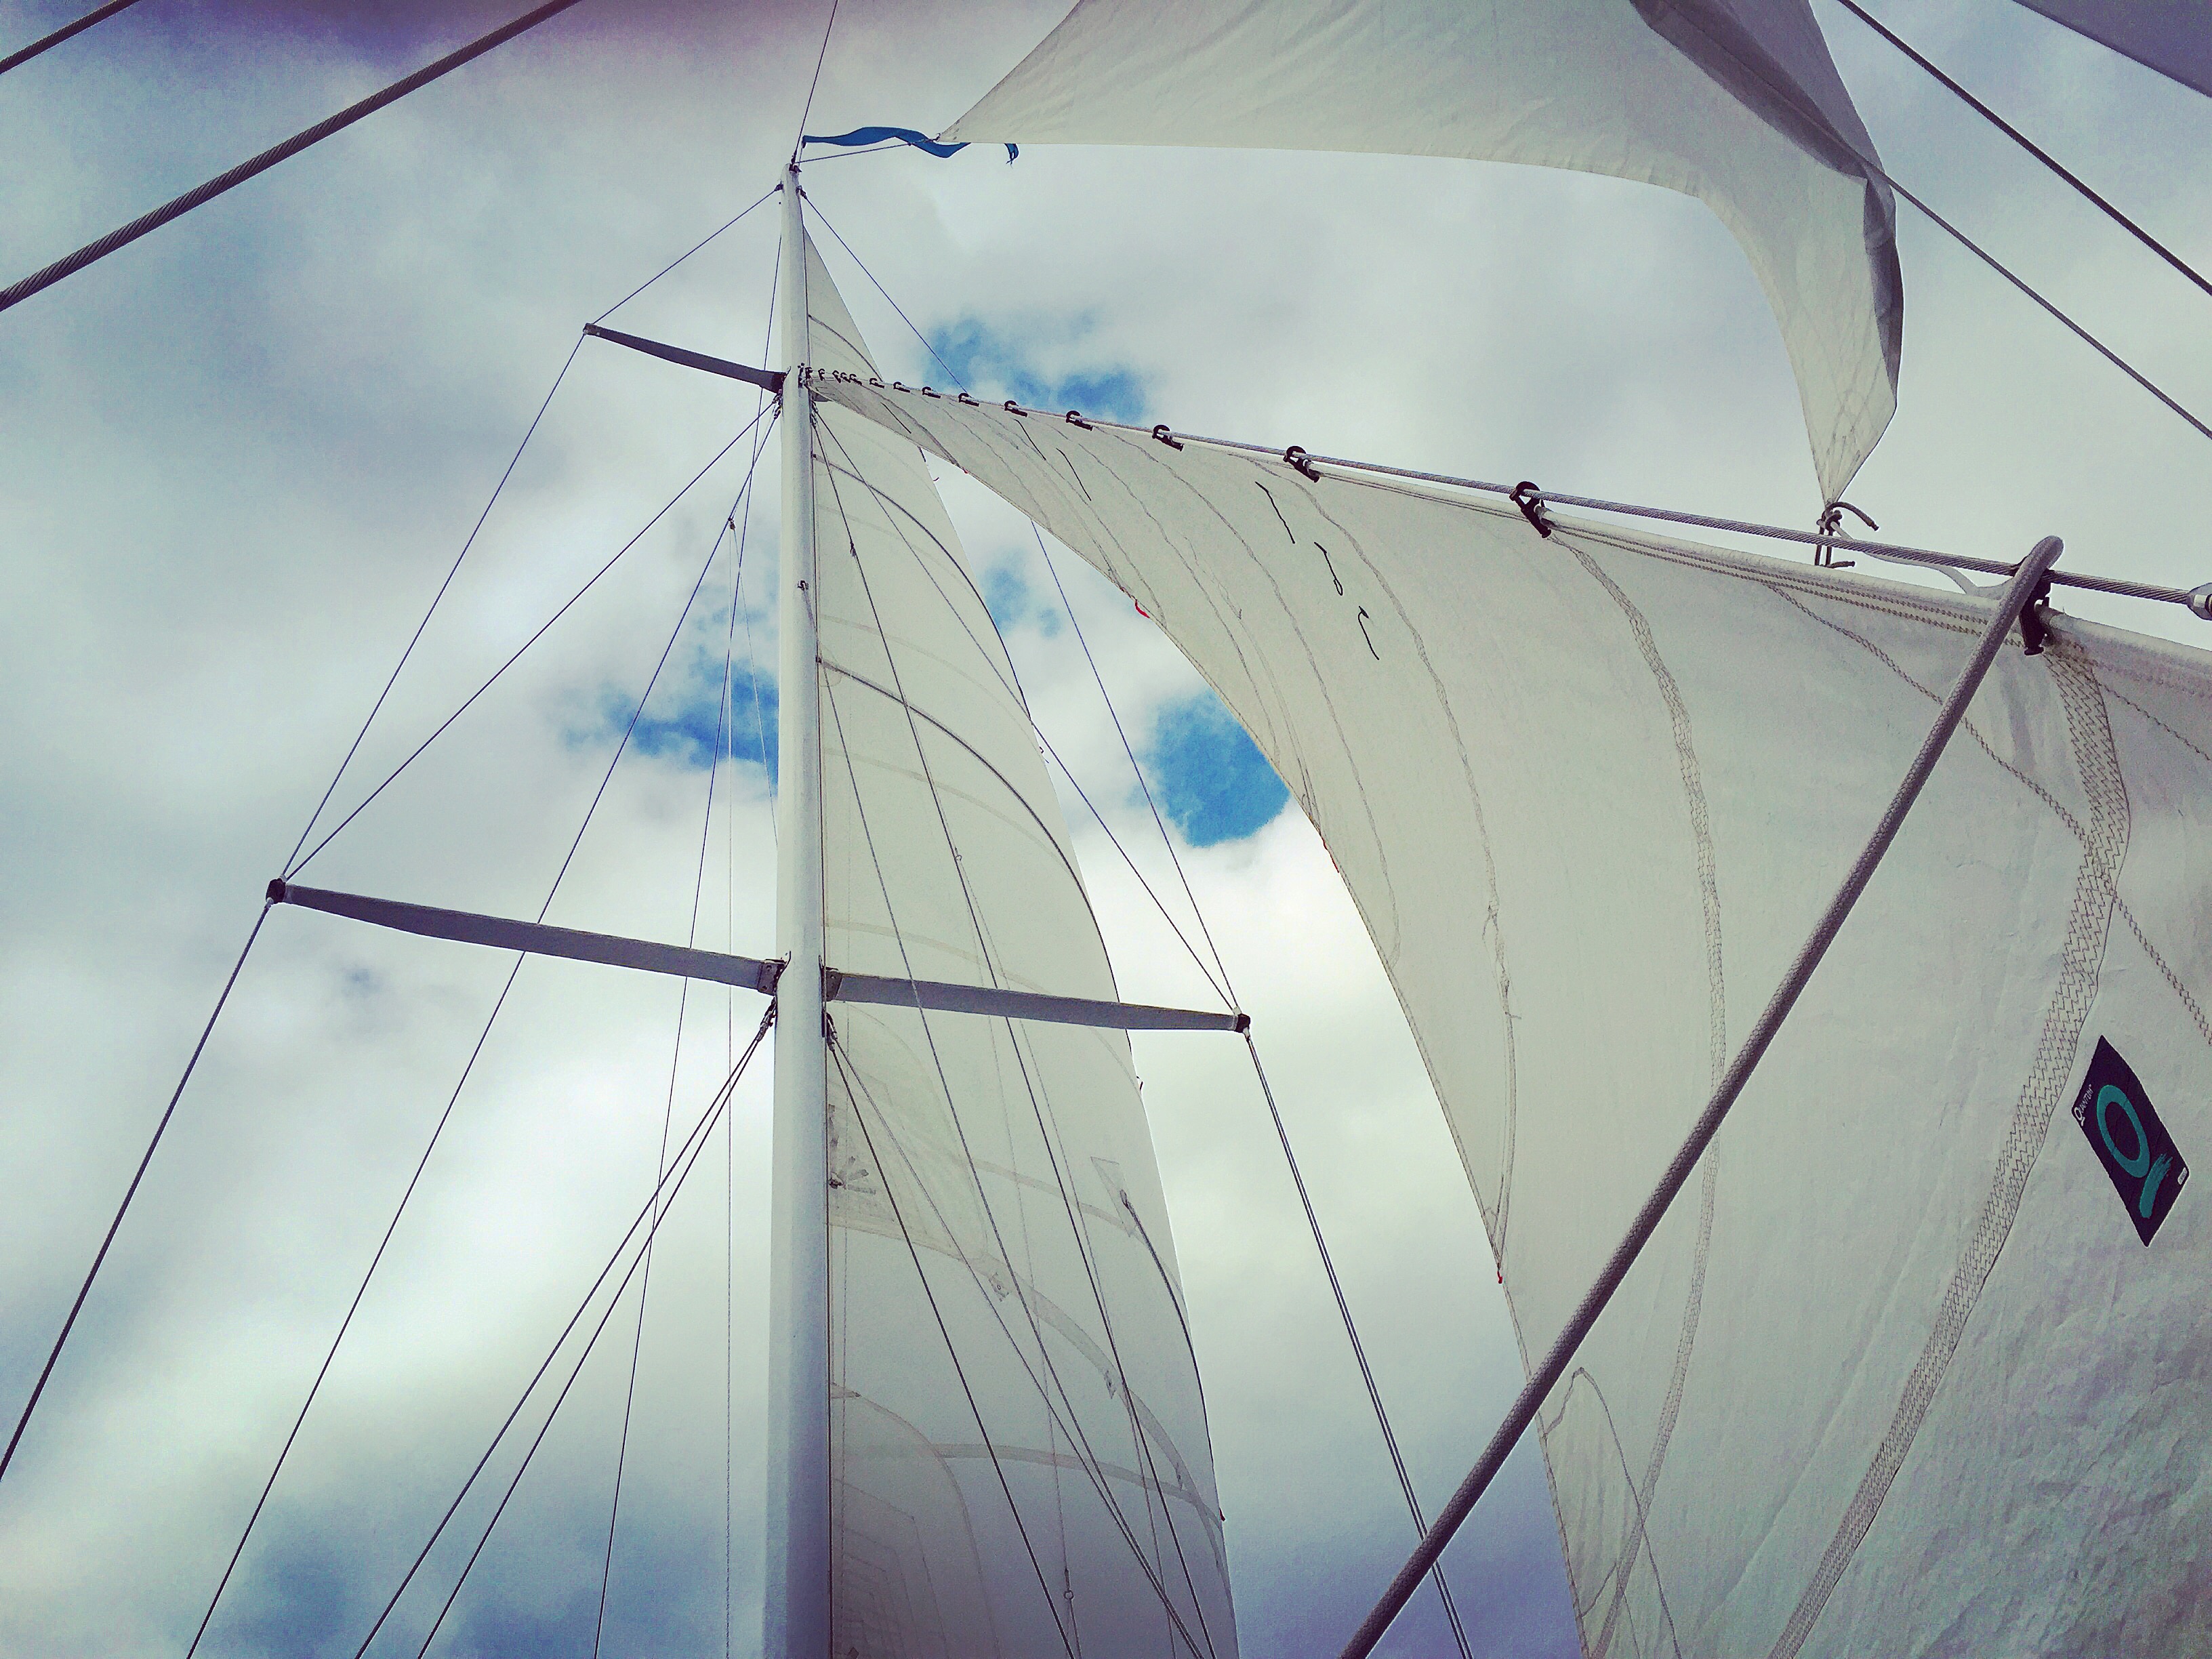 Full sails looking up at Clouds in a blue sky